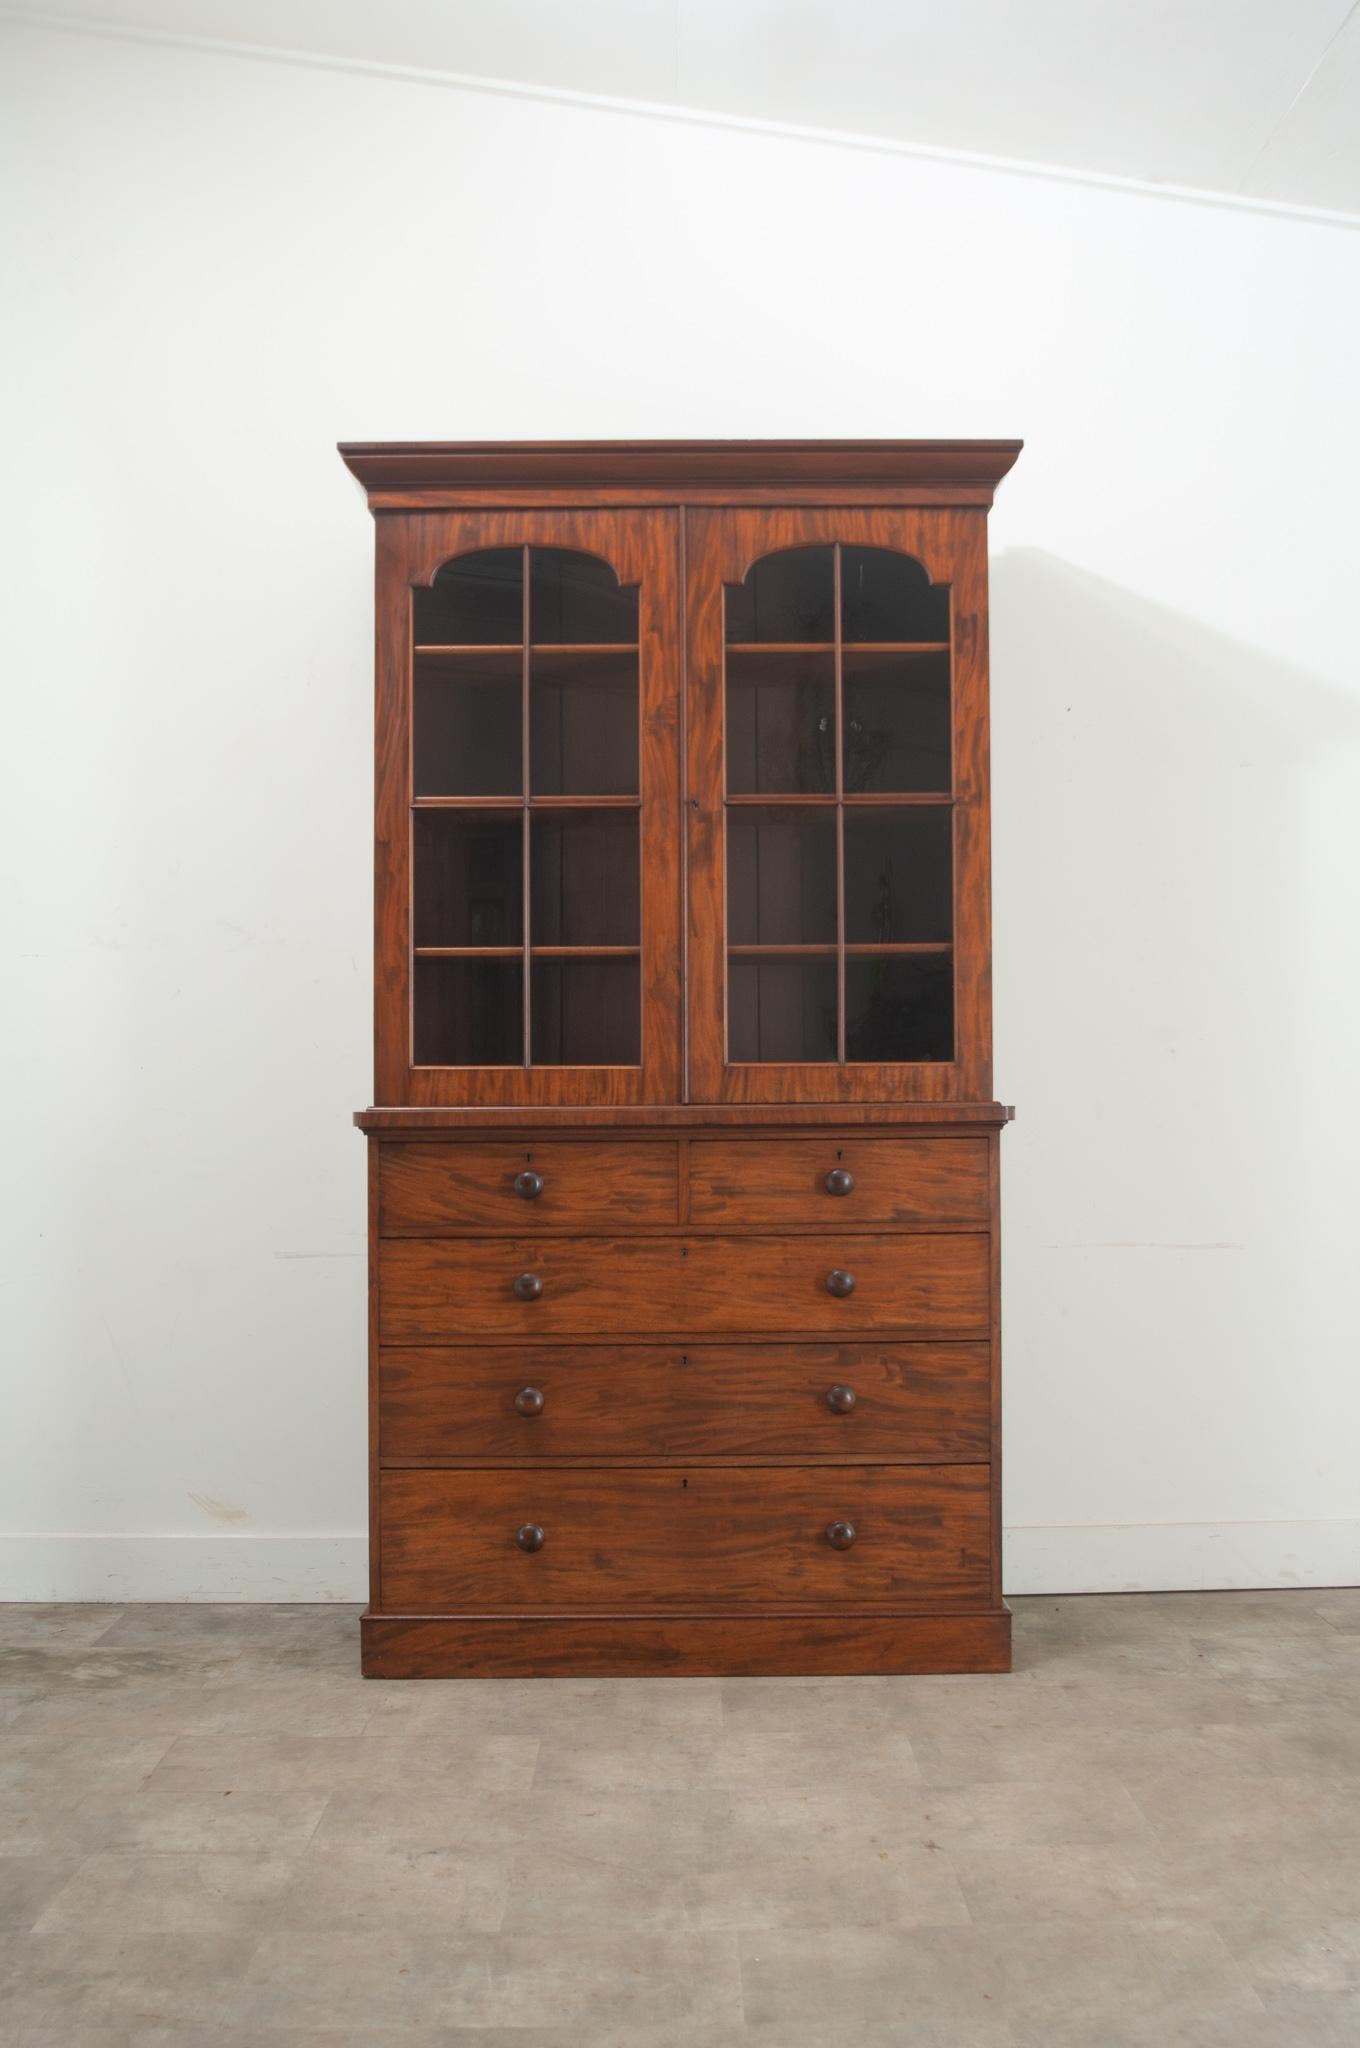 A rare English mahogany chest of drawers with a bookcase top. This cabinet has two glass front doors that open with a working lock and key to three adjustable interior shelves, 15”D. The chest has 5 working drawers all with easy to use turned knobs.